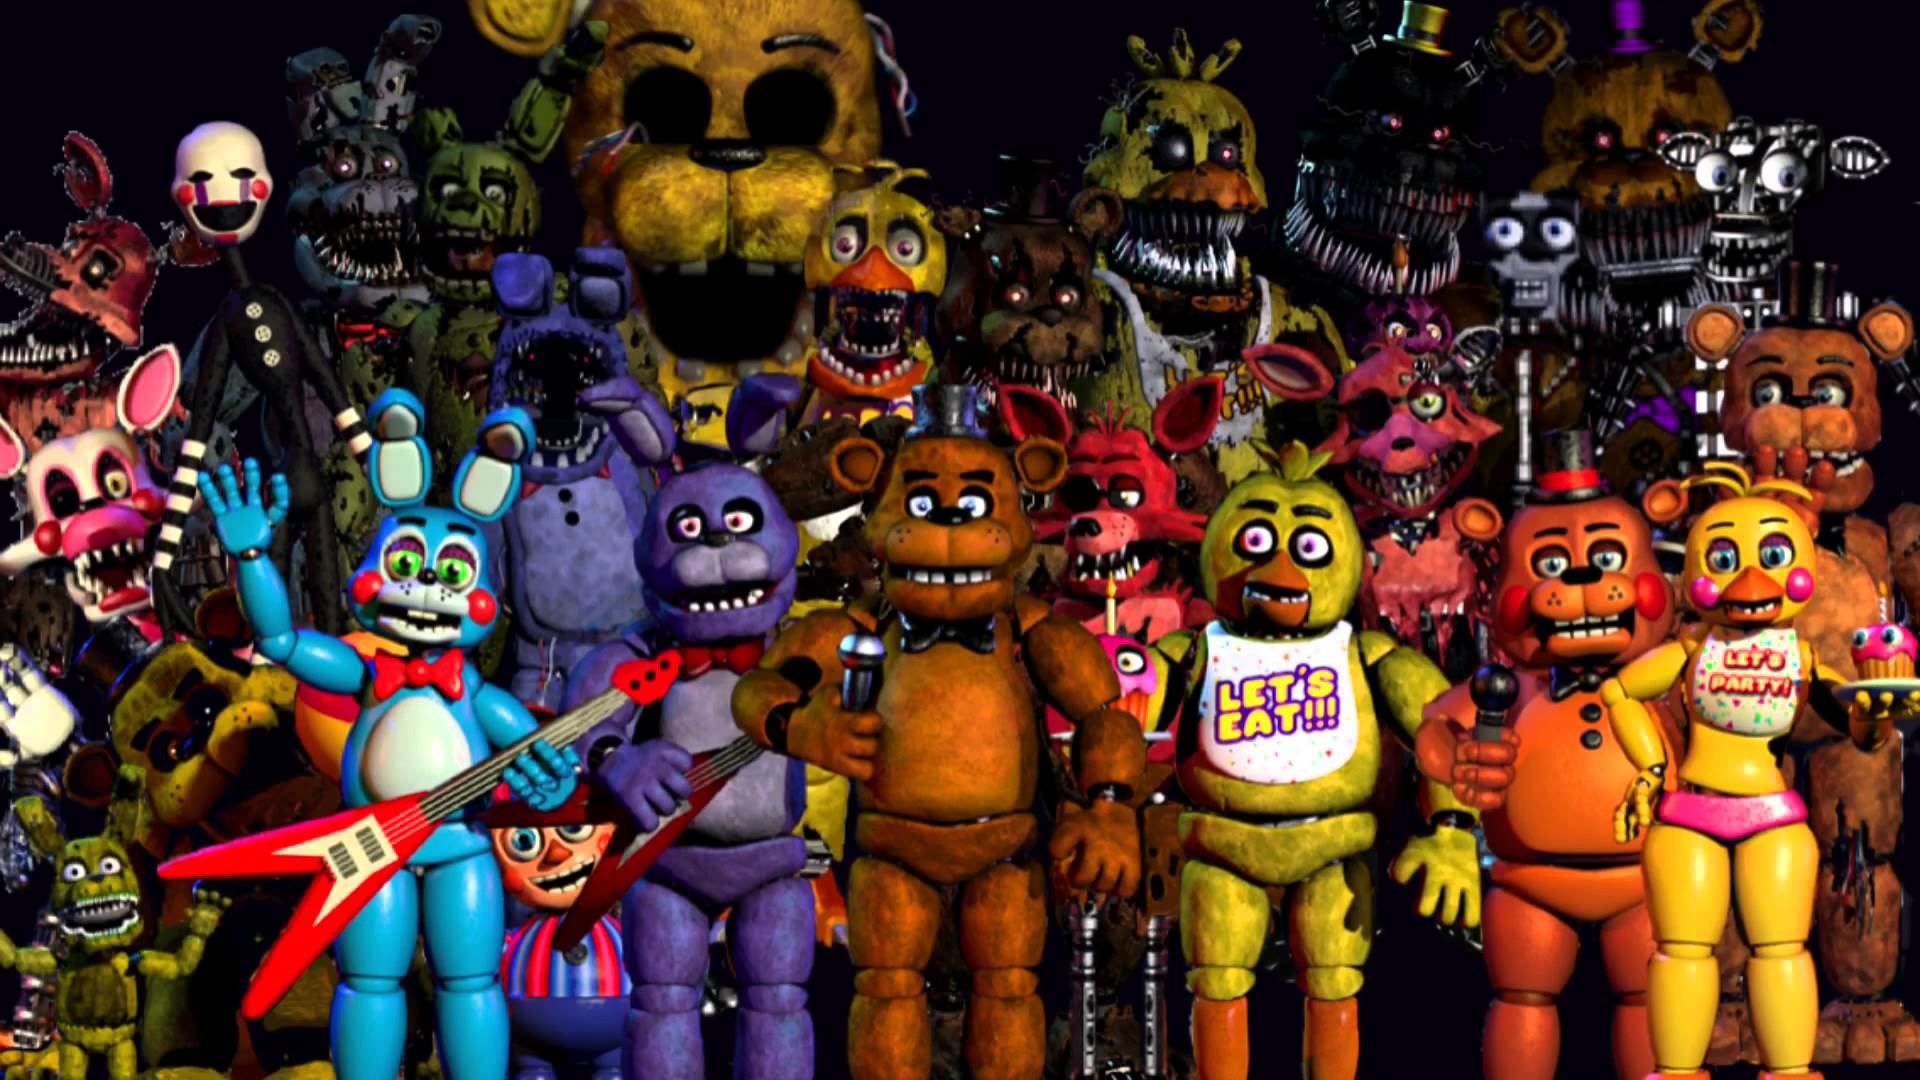 1920x1080 My Version Of The FNaF Thank You Image!